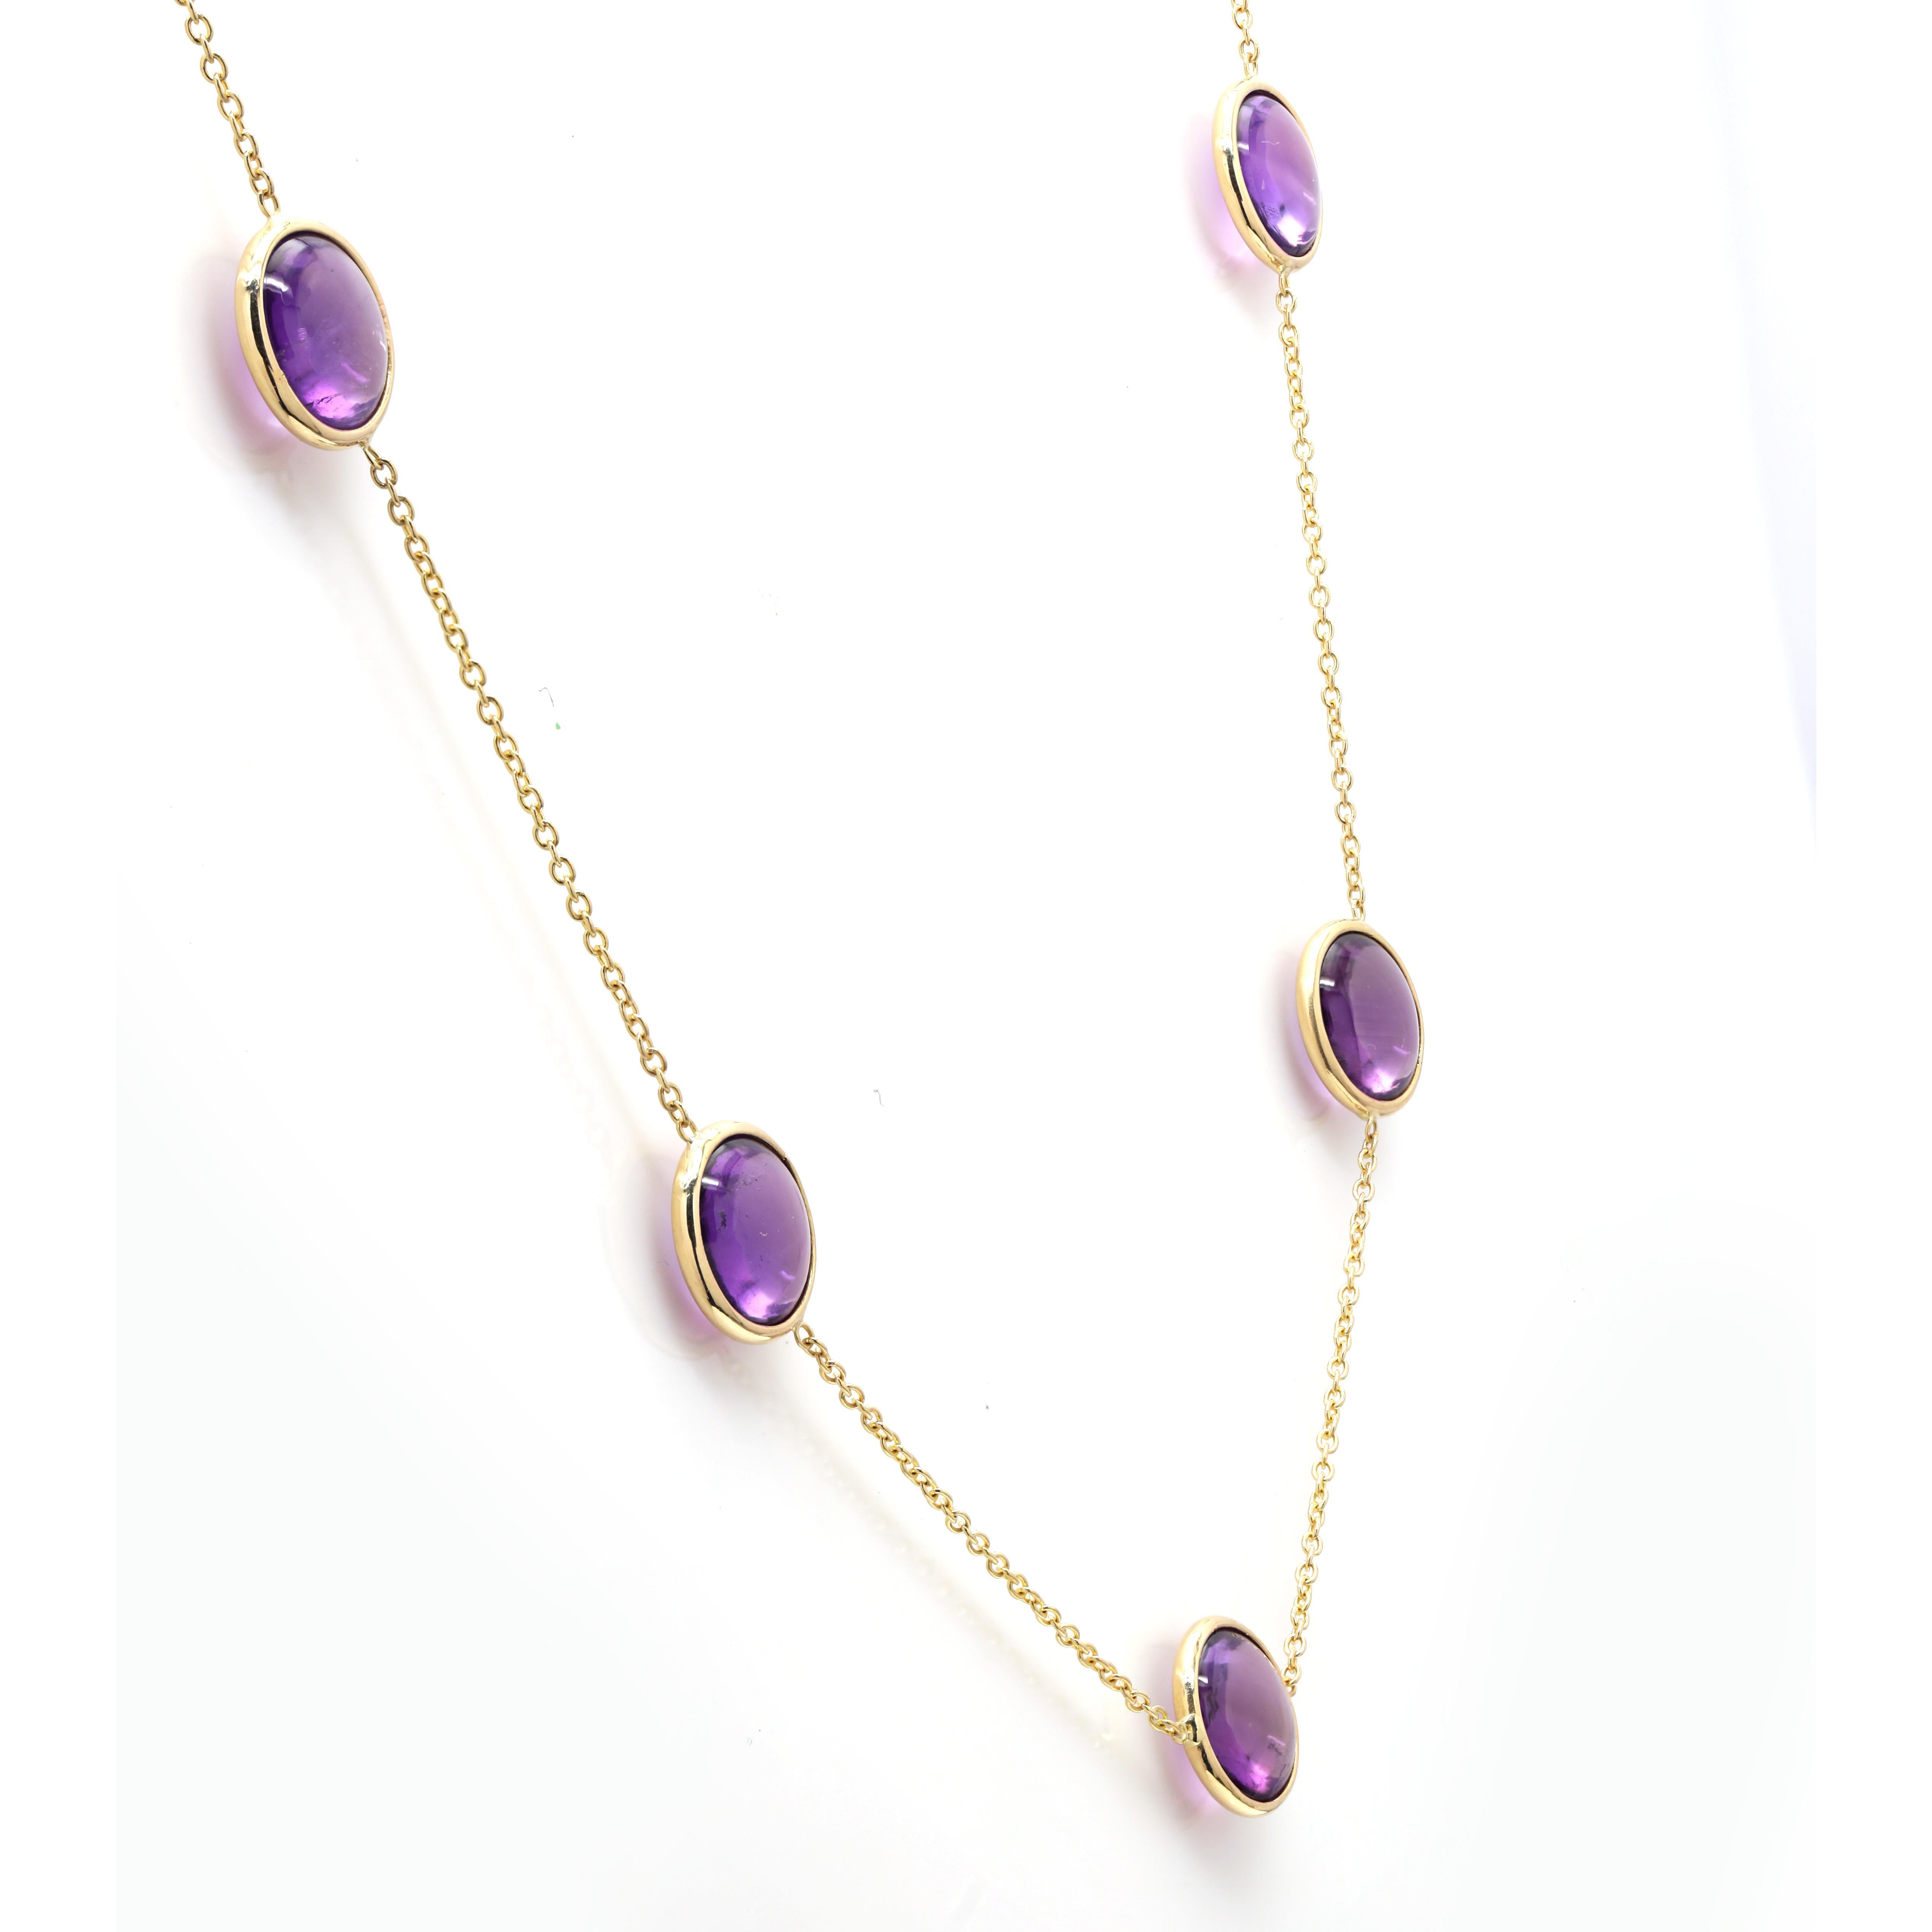 Amethyst Station Necklace studded with round cut amethyst studded on a chain in 18k Gold. This stunning piece of jewelry instantly elevates a casual look or dressy outfit. 
Amethyst helps to relieve stress and anxiety in your life. 
Designed with